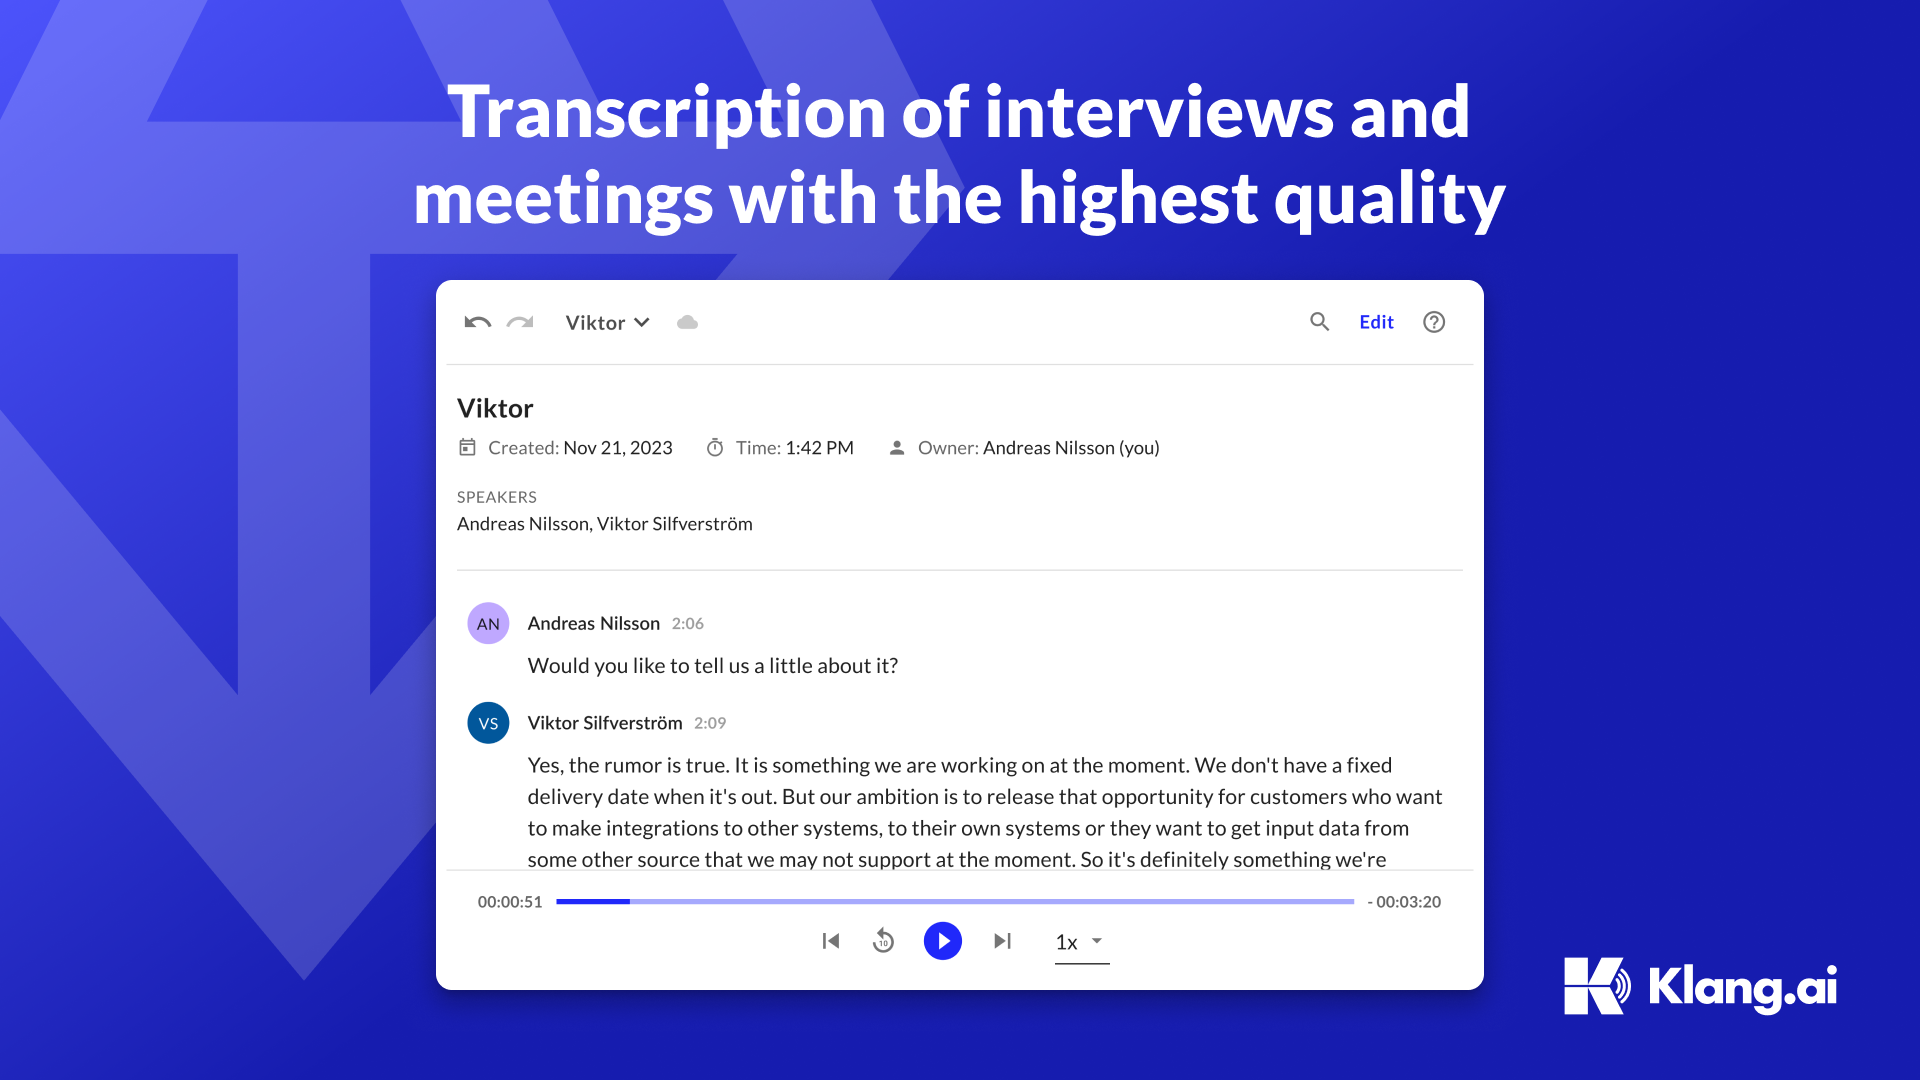 Transcribe interviews and meetings with highest quality